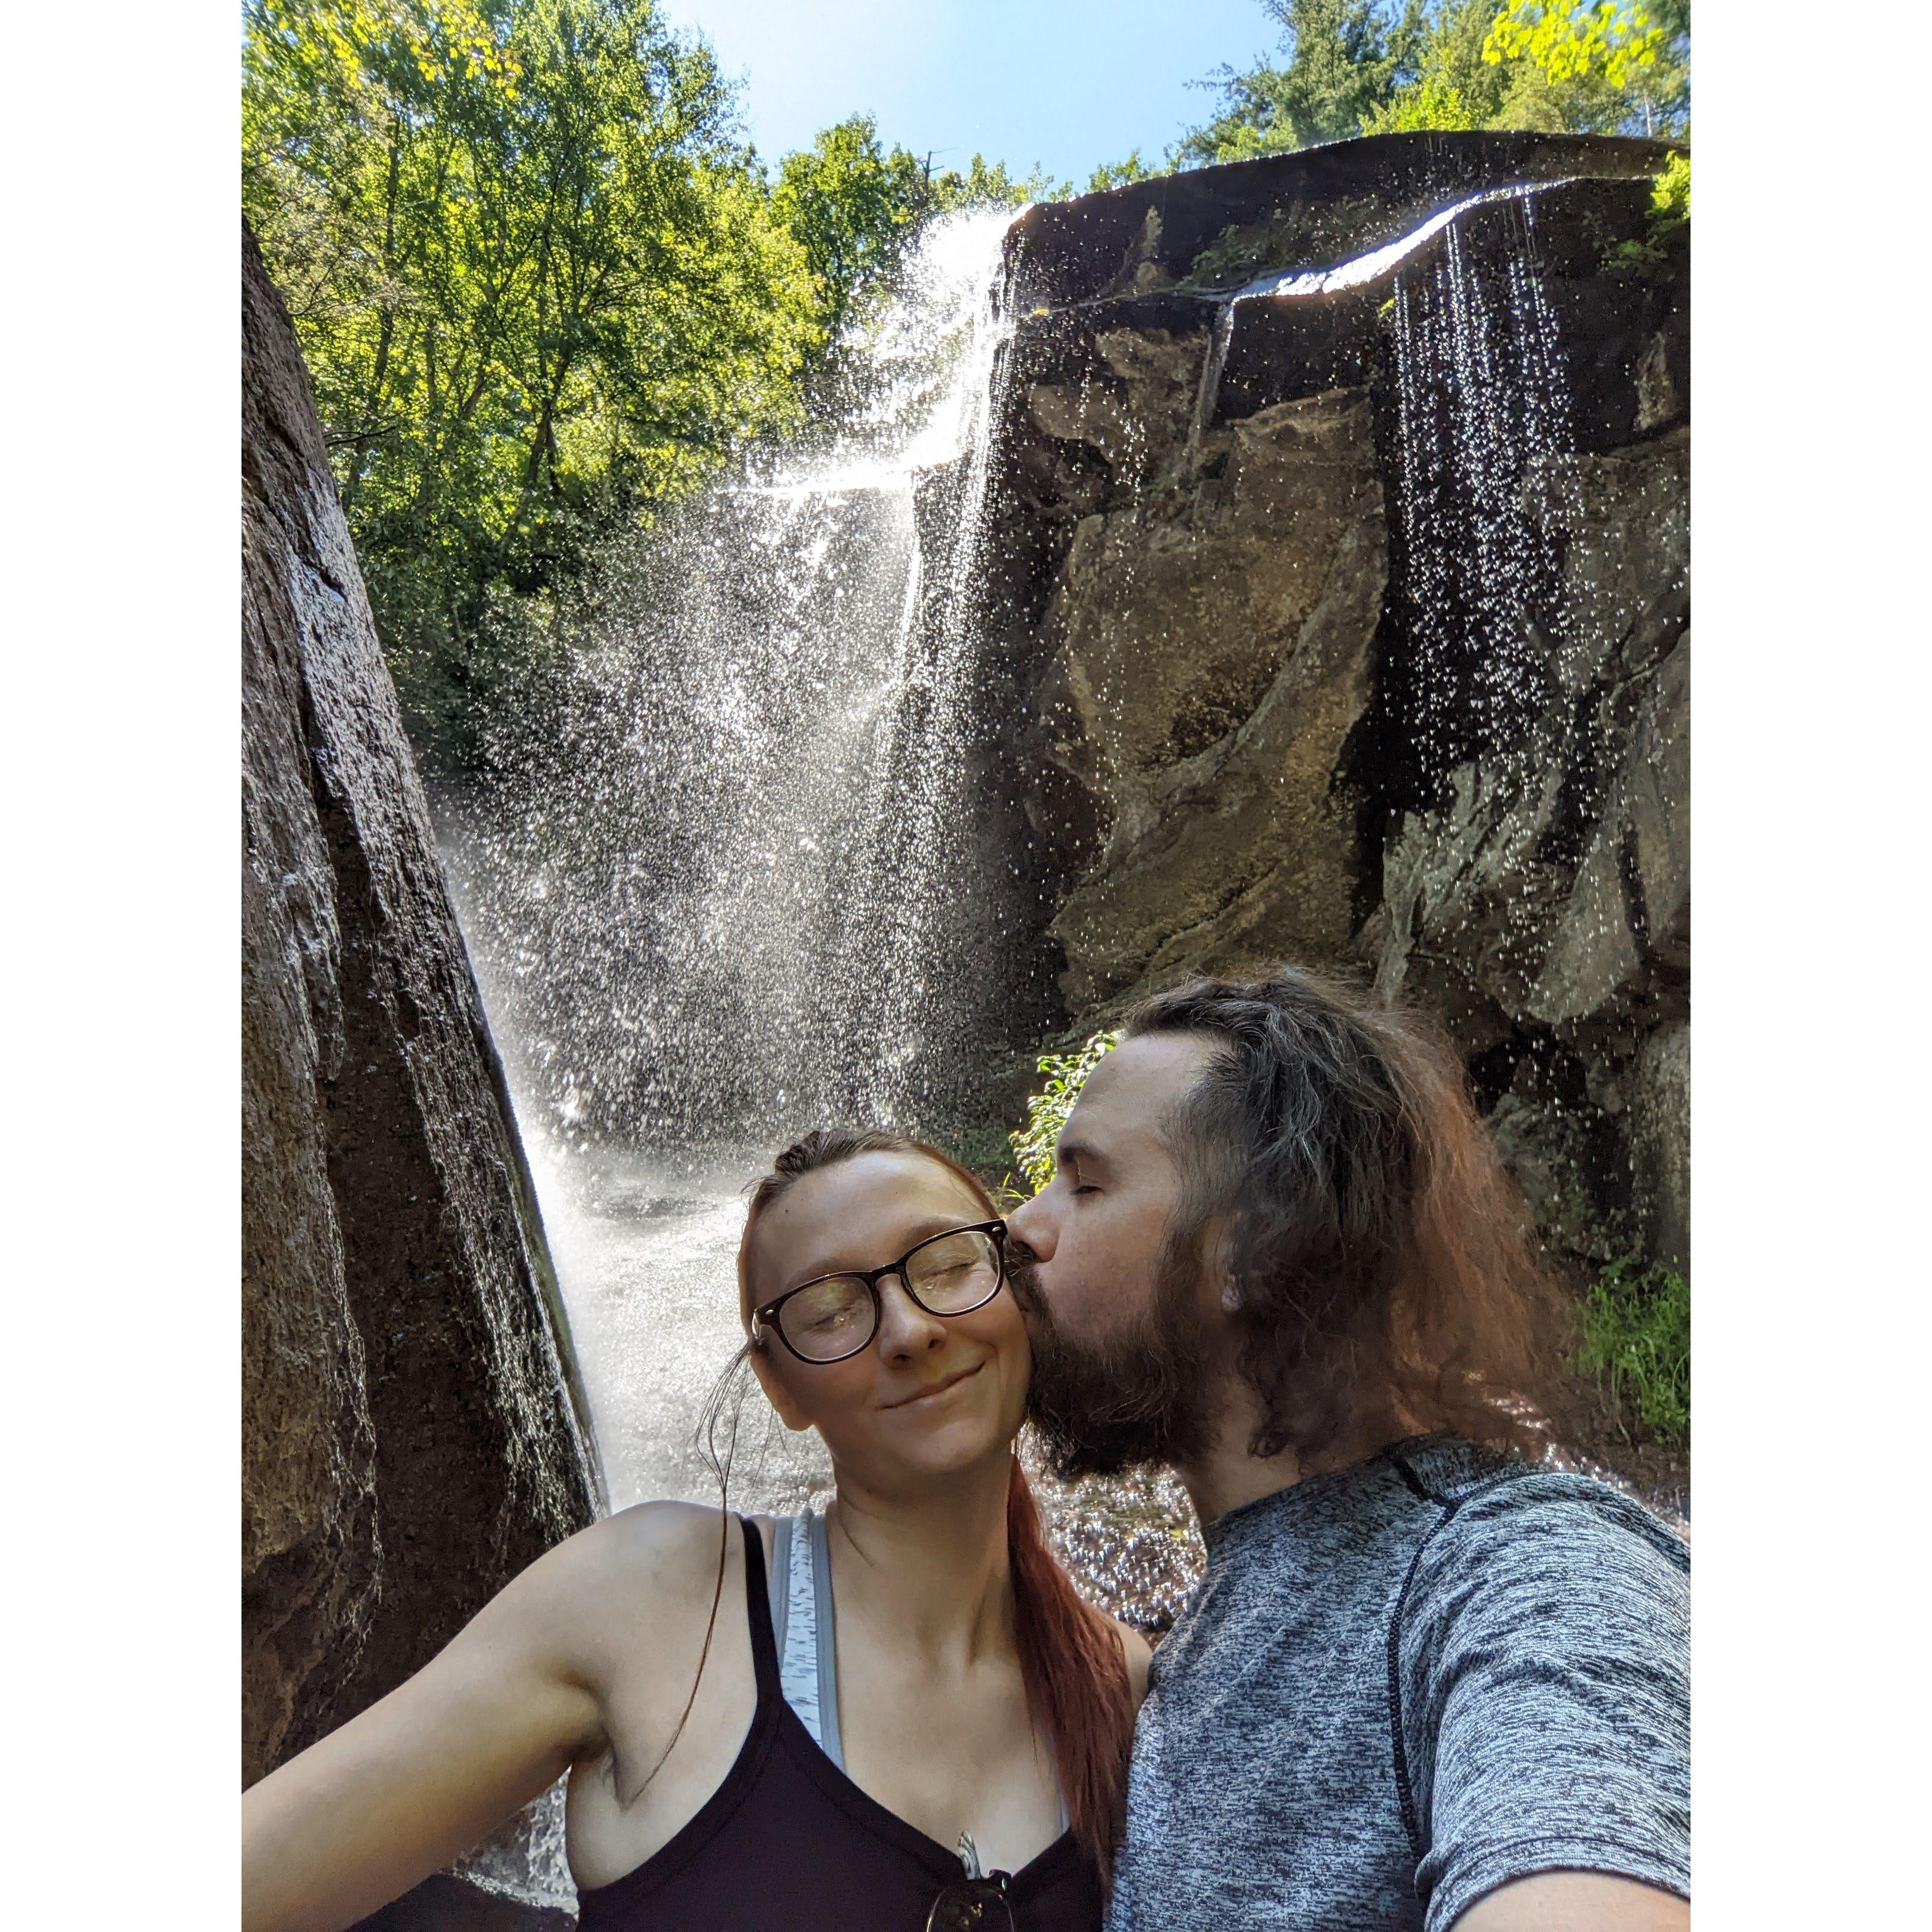 This photo was taken in front of Jones Falls not far off the Appalachian trail after we had been searching for it for two days because we crossed the wrong river.